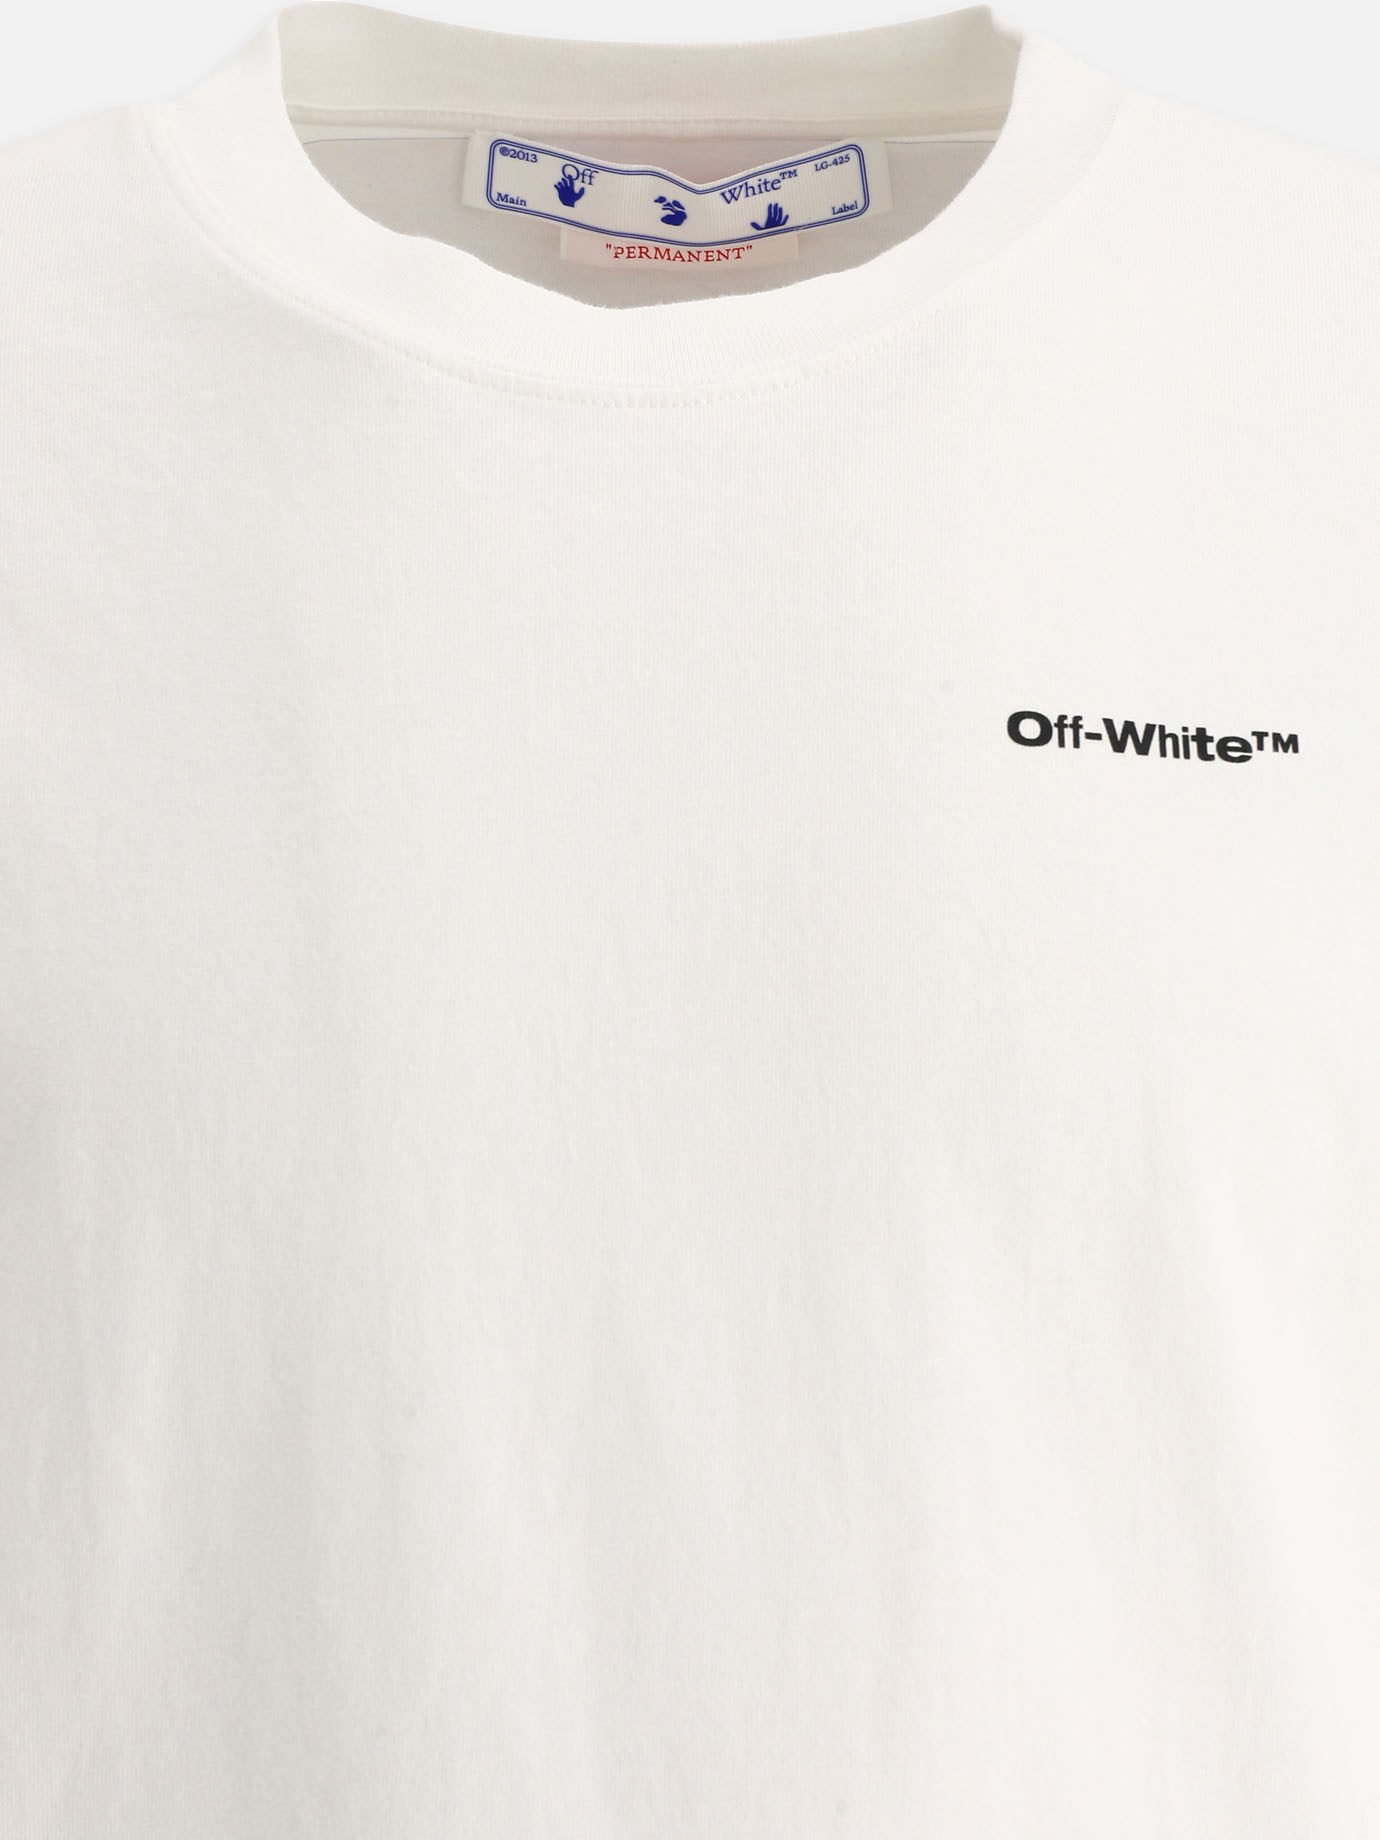 T-shirt  Wave Outline  by Off-White